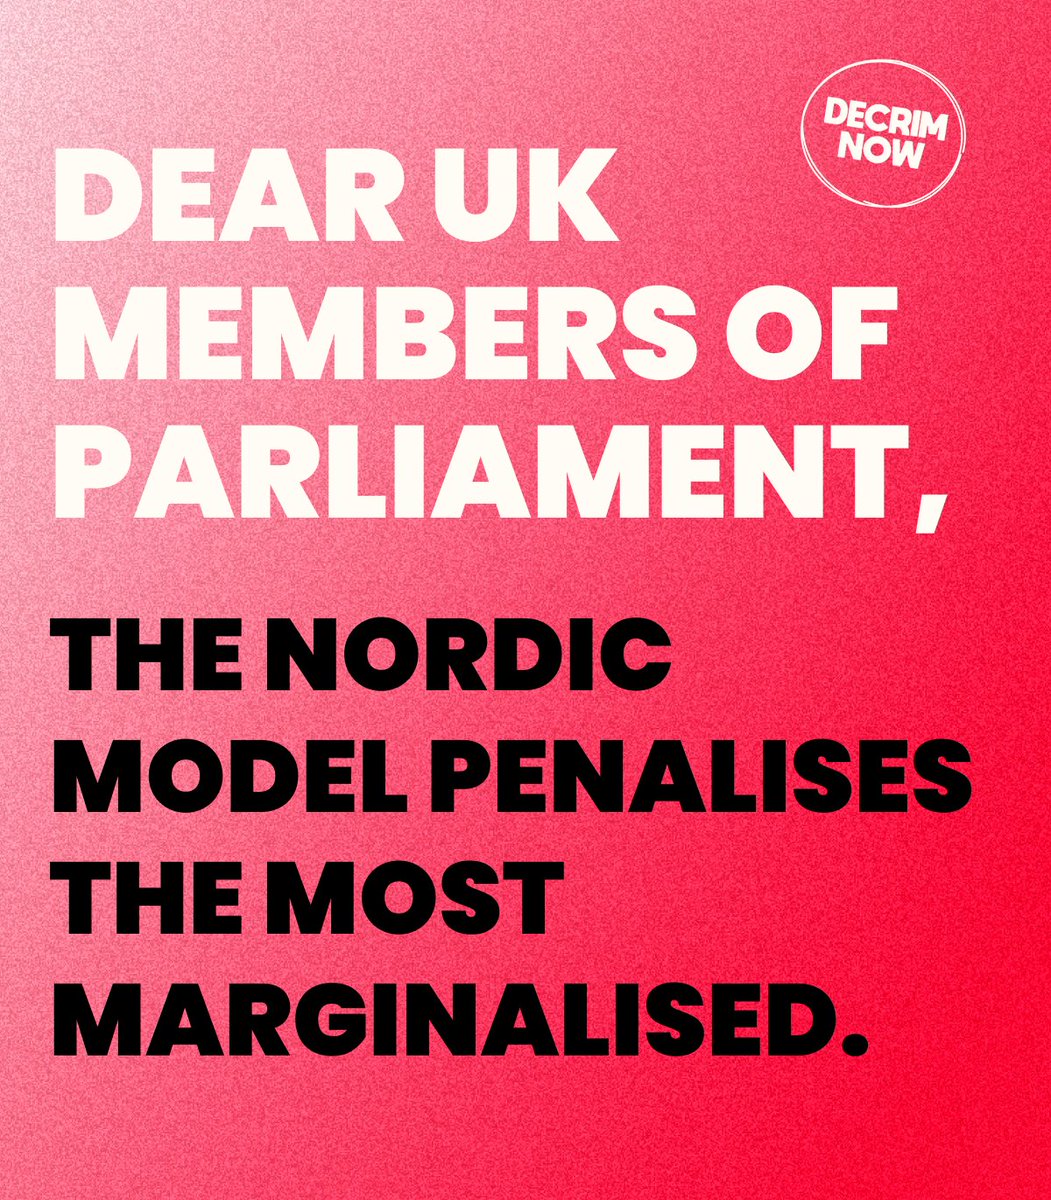  @GMB_union signed our open letter against the Nordic Model GMB is a trade union that represents all workers. They have over 620,000 members who work in every type of job imaginable.Read the letter here  https://decrimnow.org.uk/open-letter-on-the-nordic-model/  #notonordicmodel